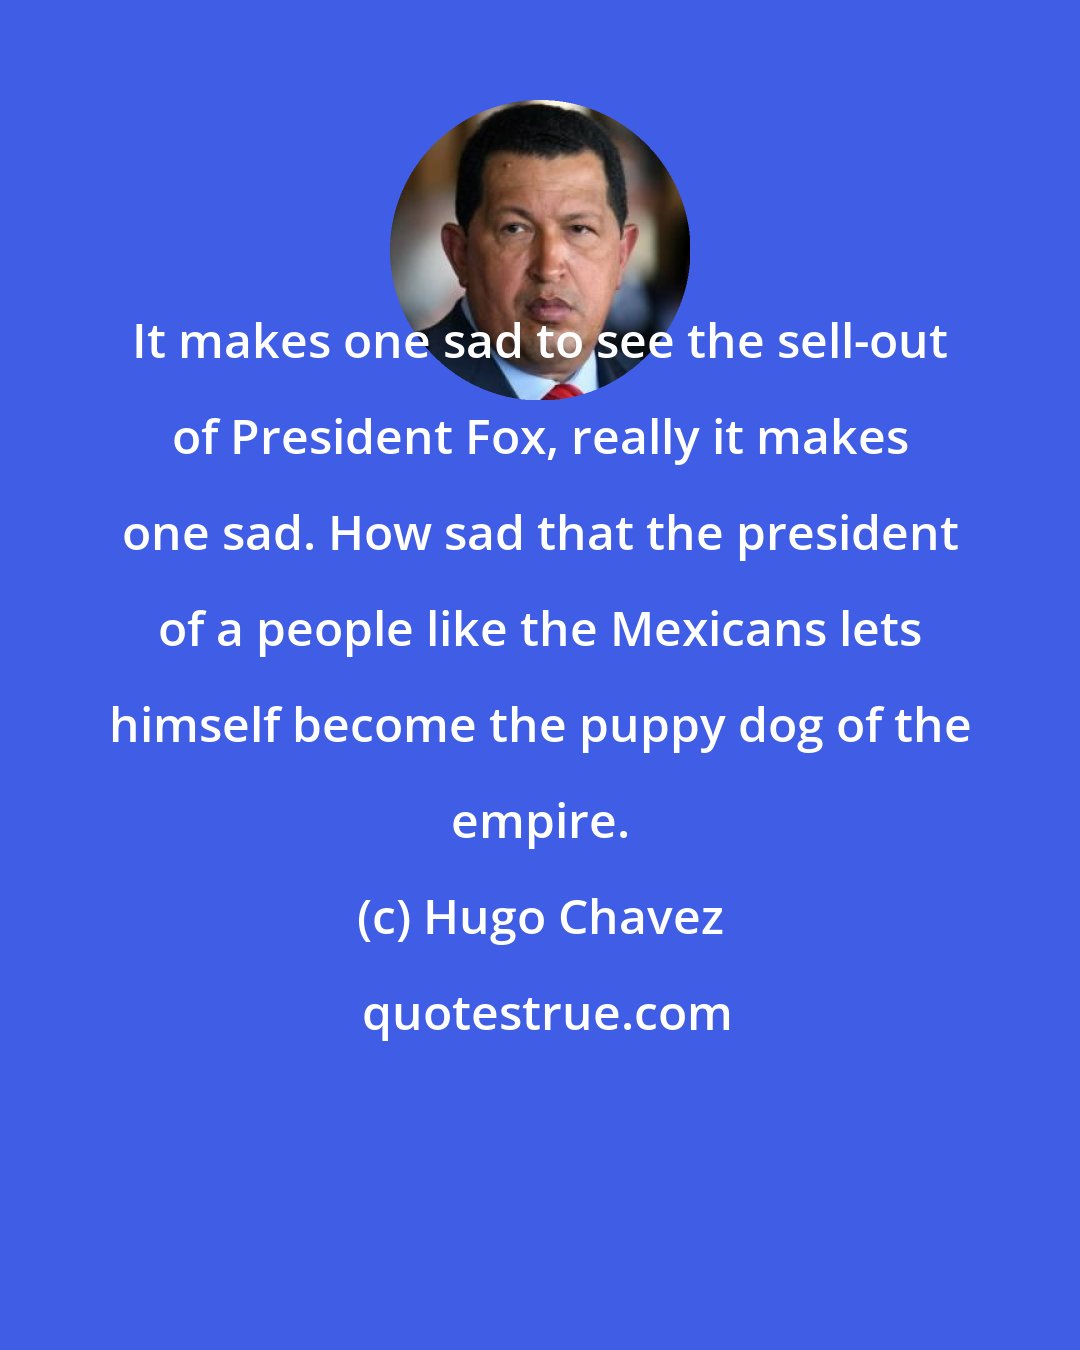 Hugo Chavez: It makes one sad to see the sell-out of President Fox, really it makes one sad. How sad that the president of a people like the Mexicans lets himself become the puppy dog of the empire.